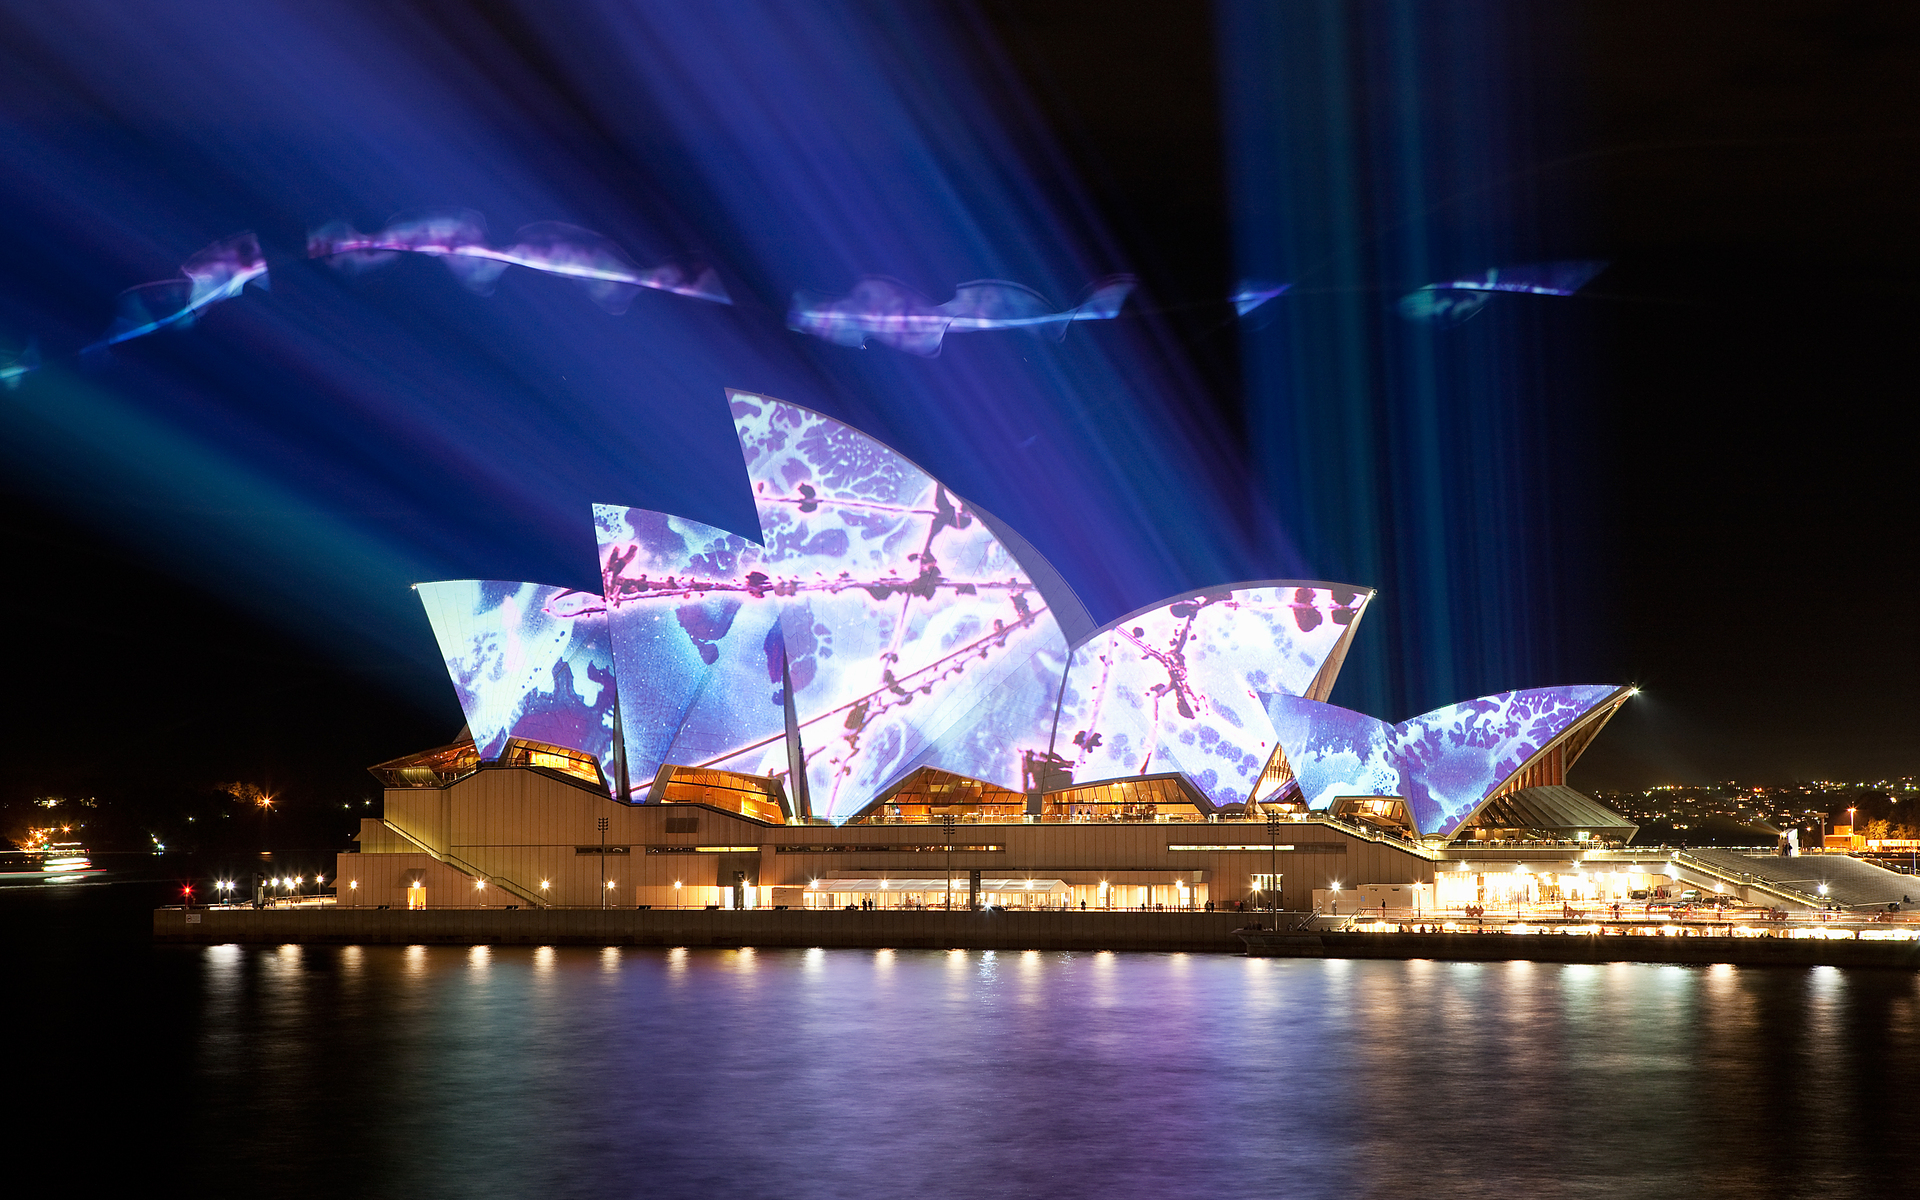 australia, Sydney, Sydney opera house, Opera, Architecture, Buildings, Manipulations, Photography, Psychedelic, Night, Lights, Cities, Hdr Wallpaper